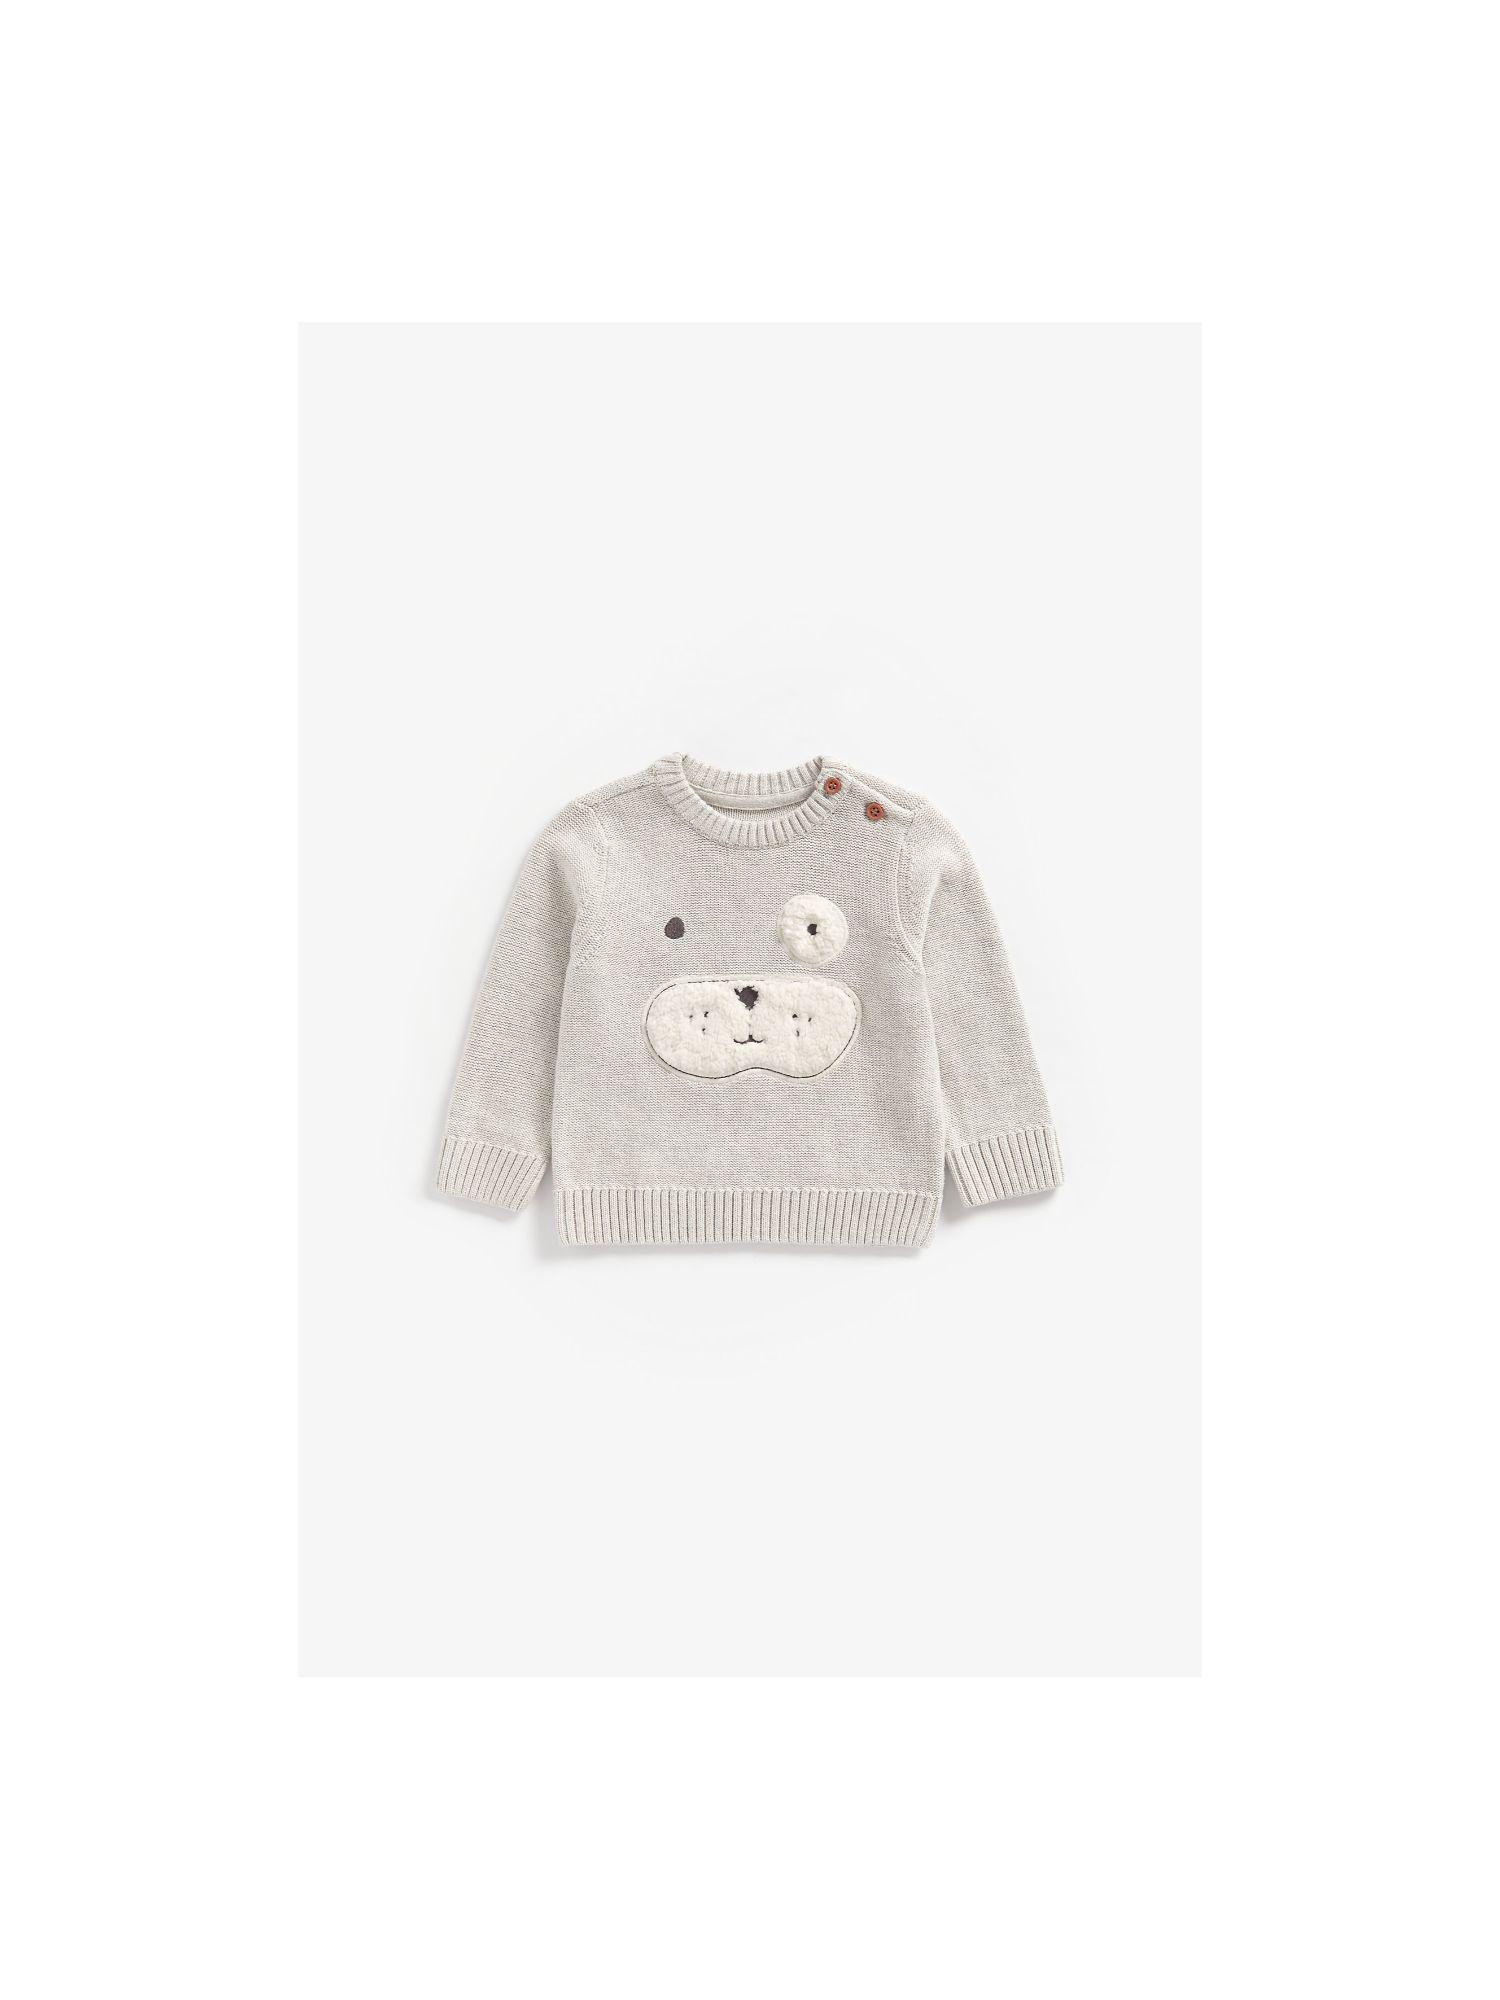 mother-care-mb-hsh-dog-novelty-knit-sweater